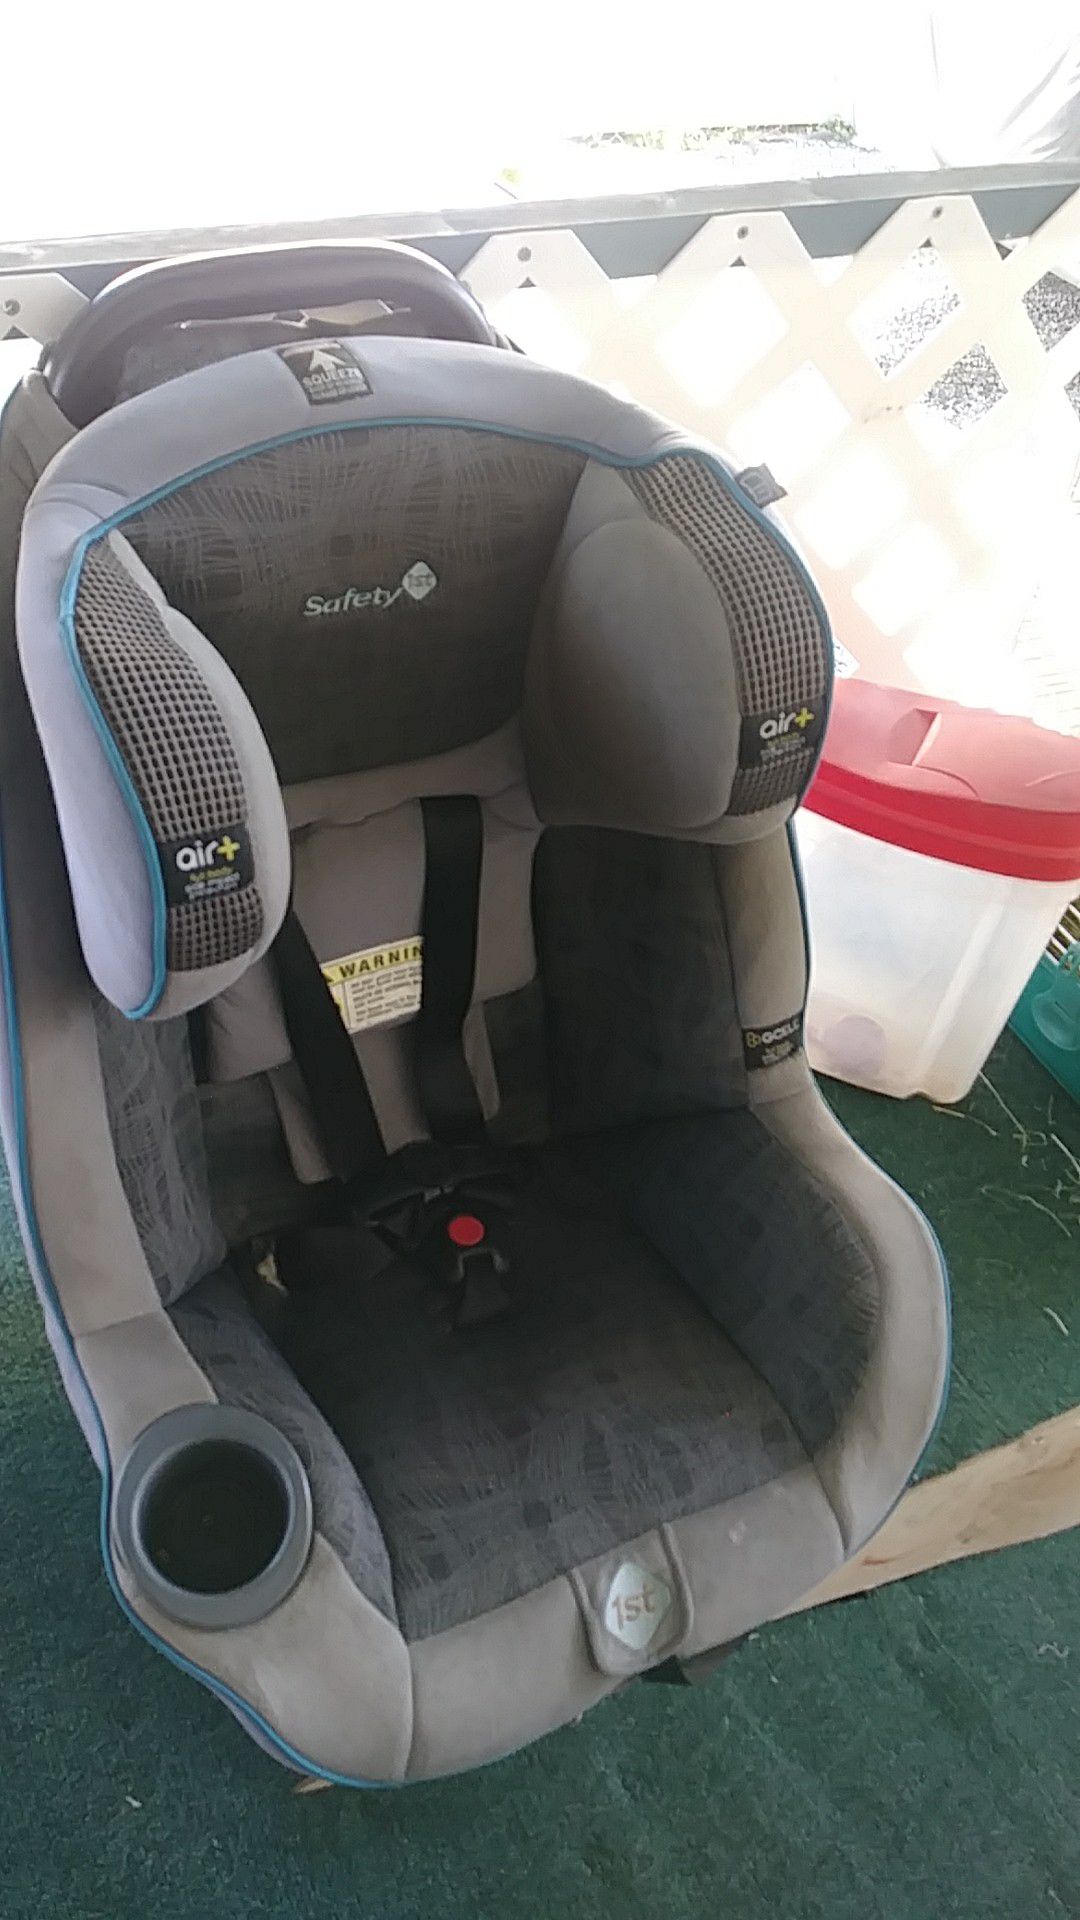 Safety 1st carseat